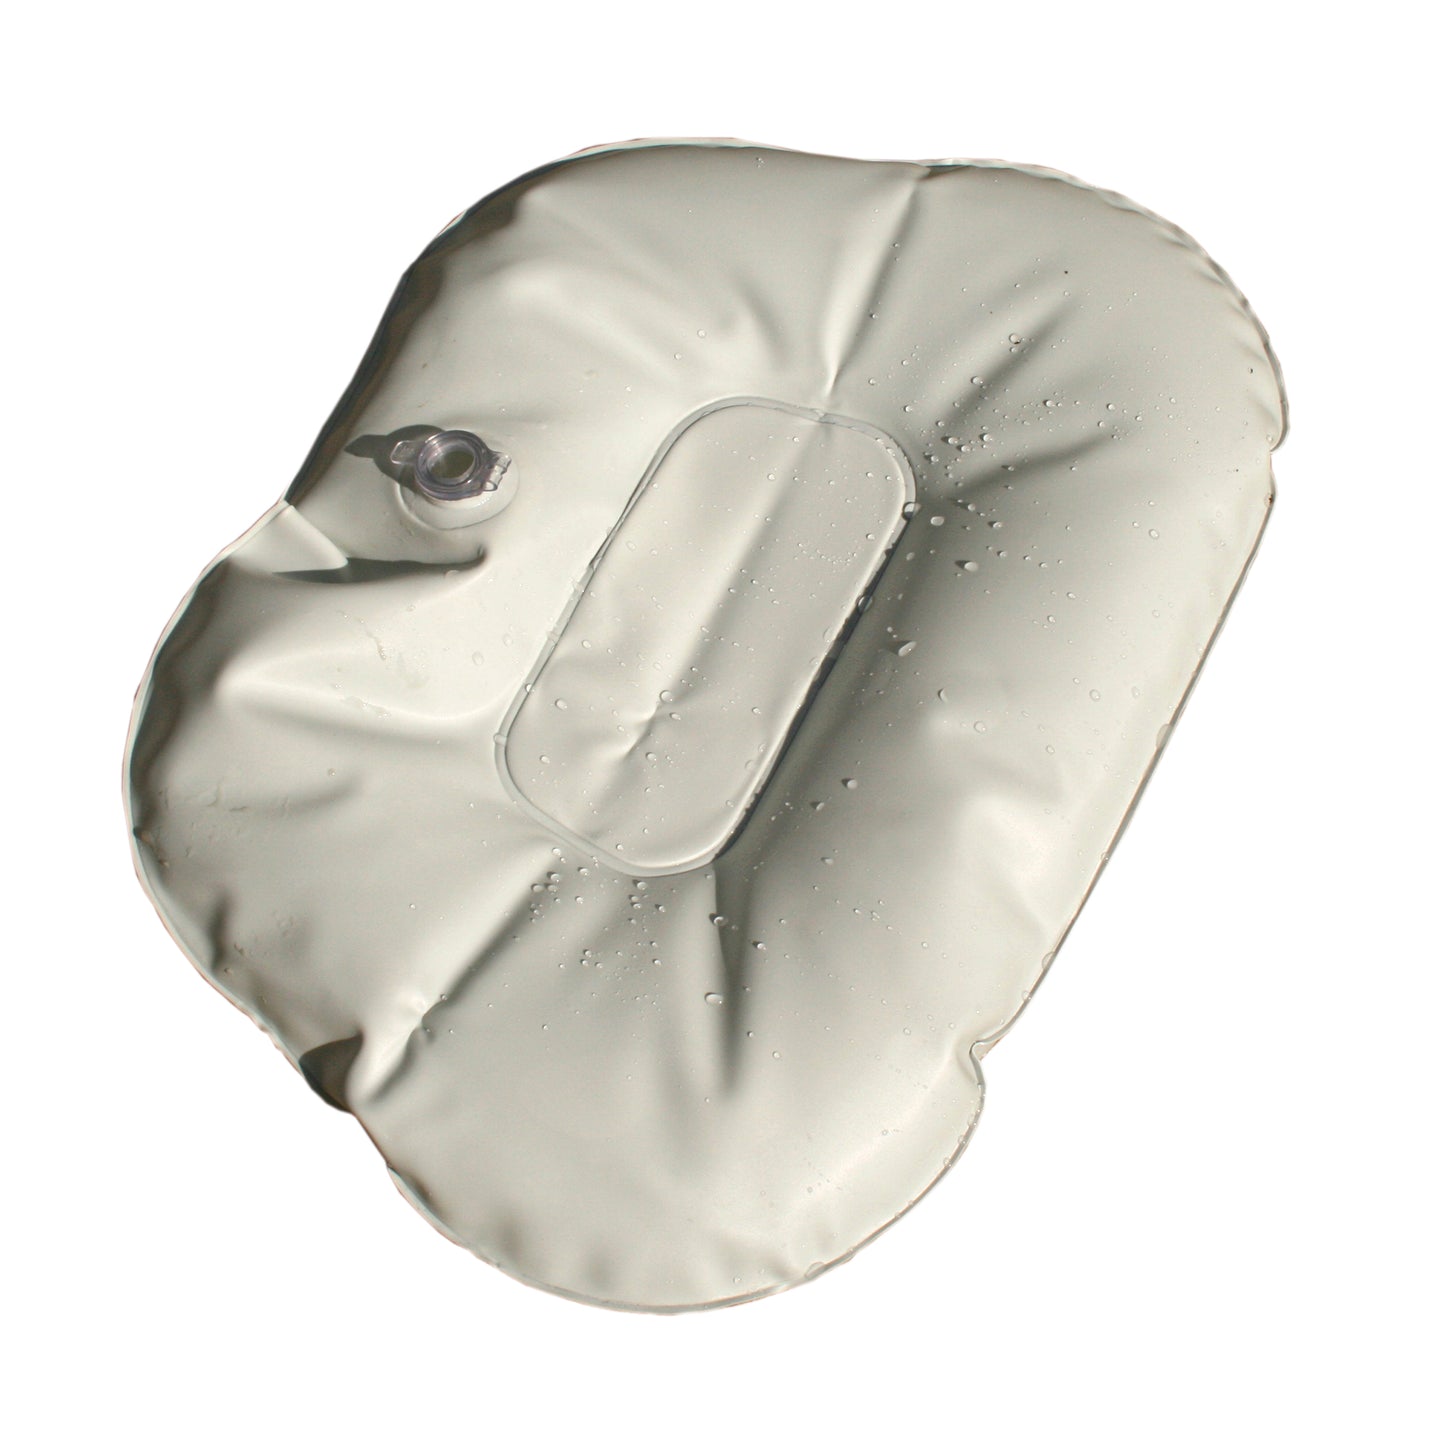 Water Filled Spa Booster Seat / Cushion